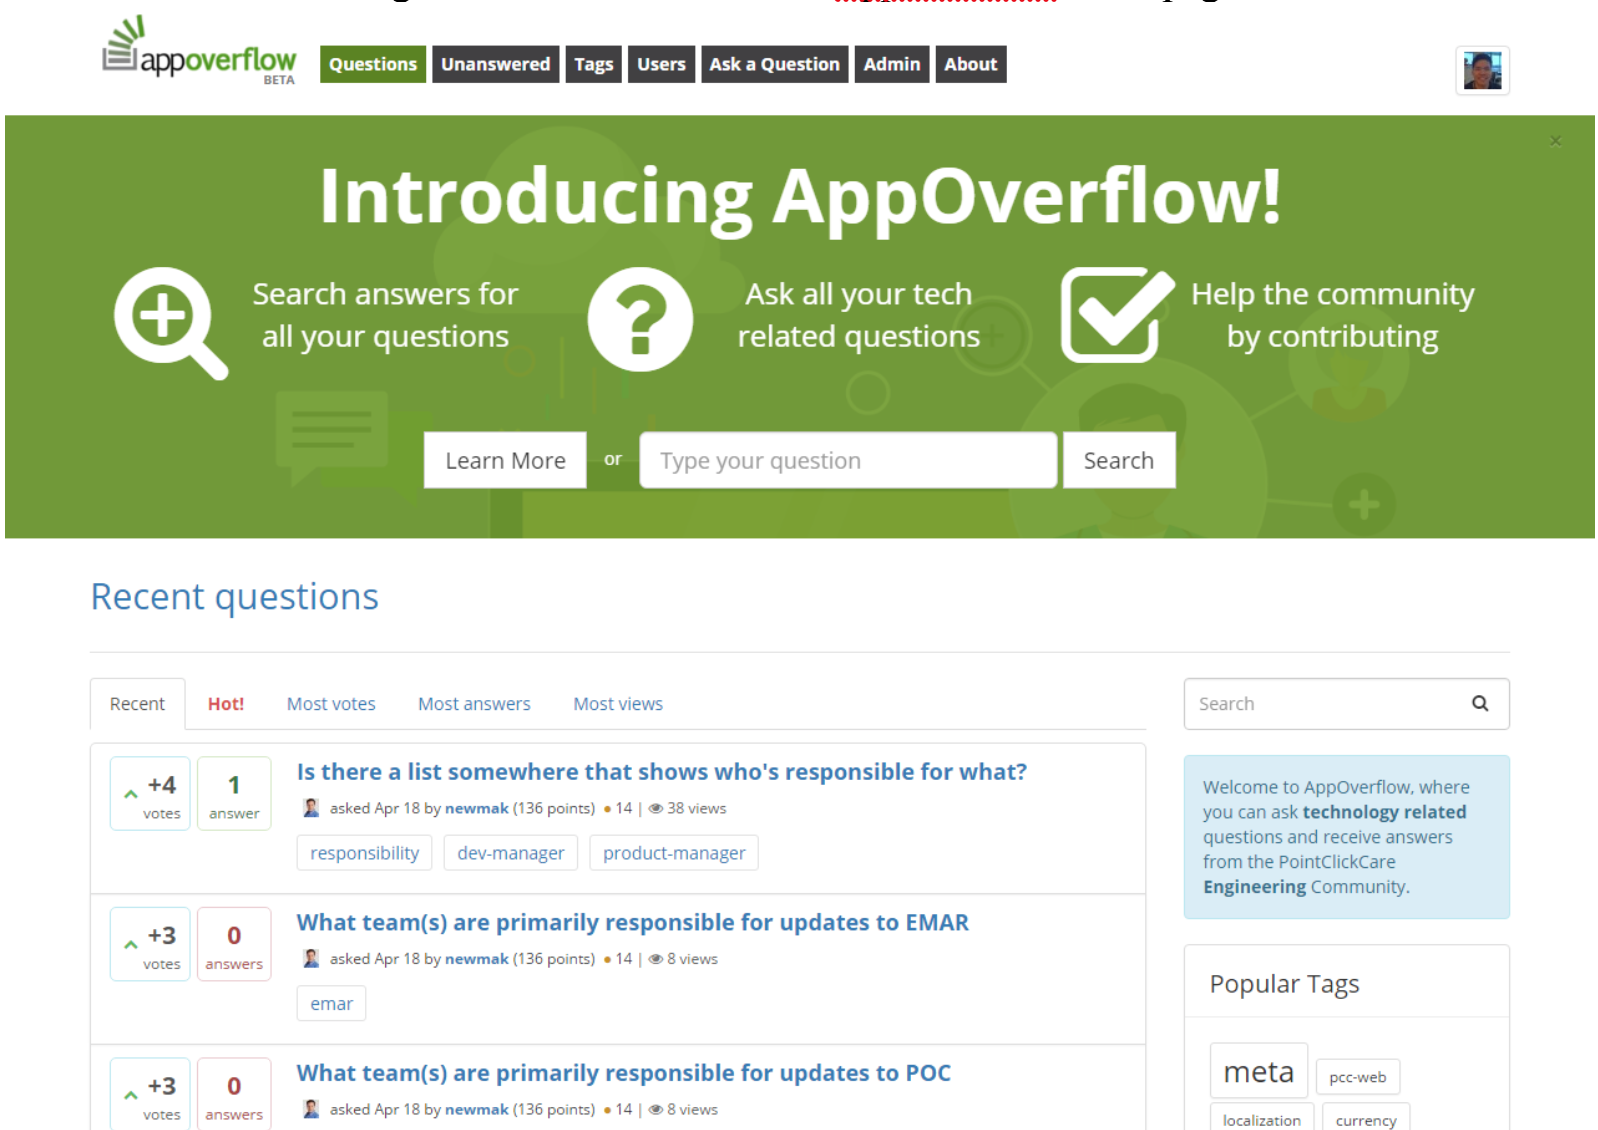 Screenshot of the AppOverflow home page